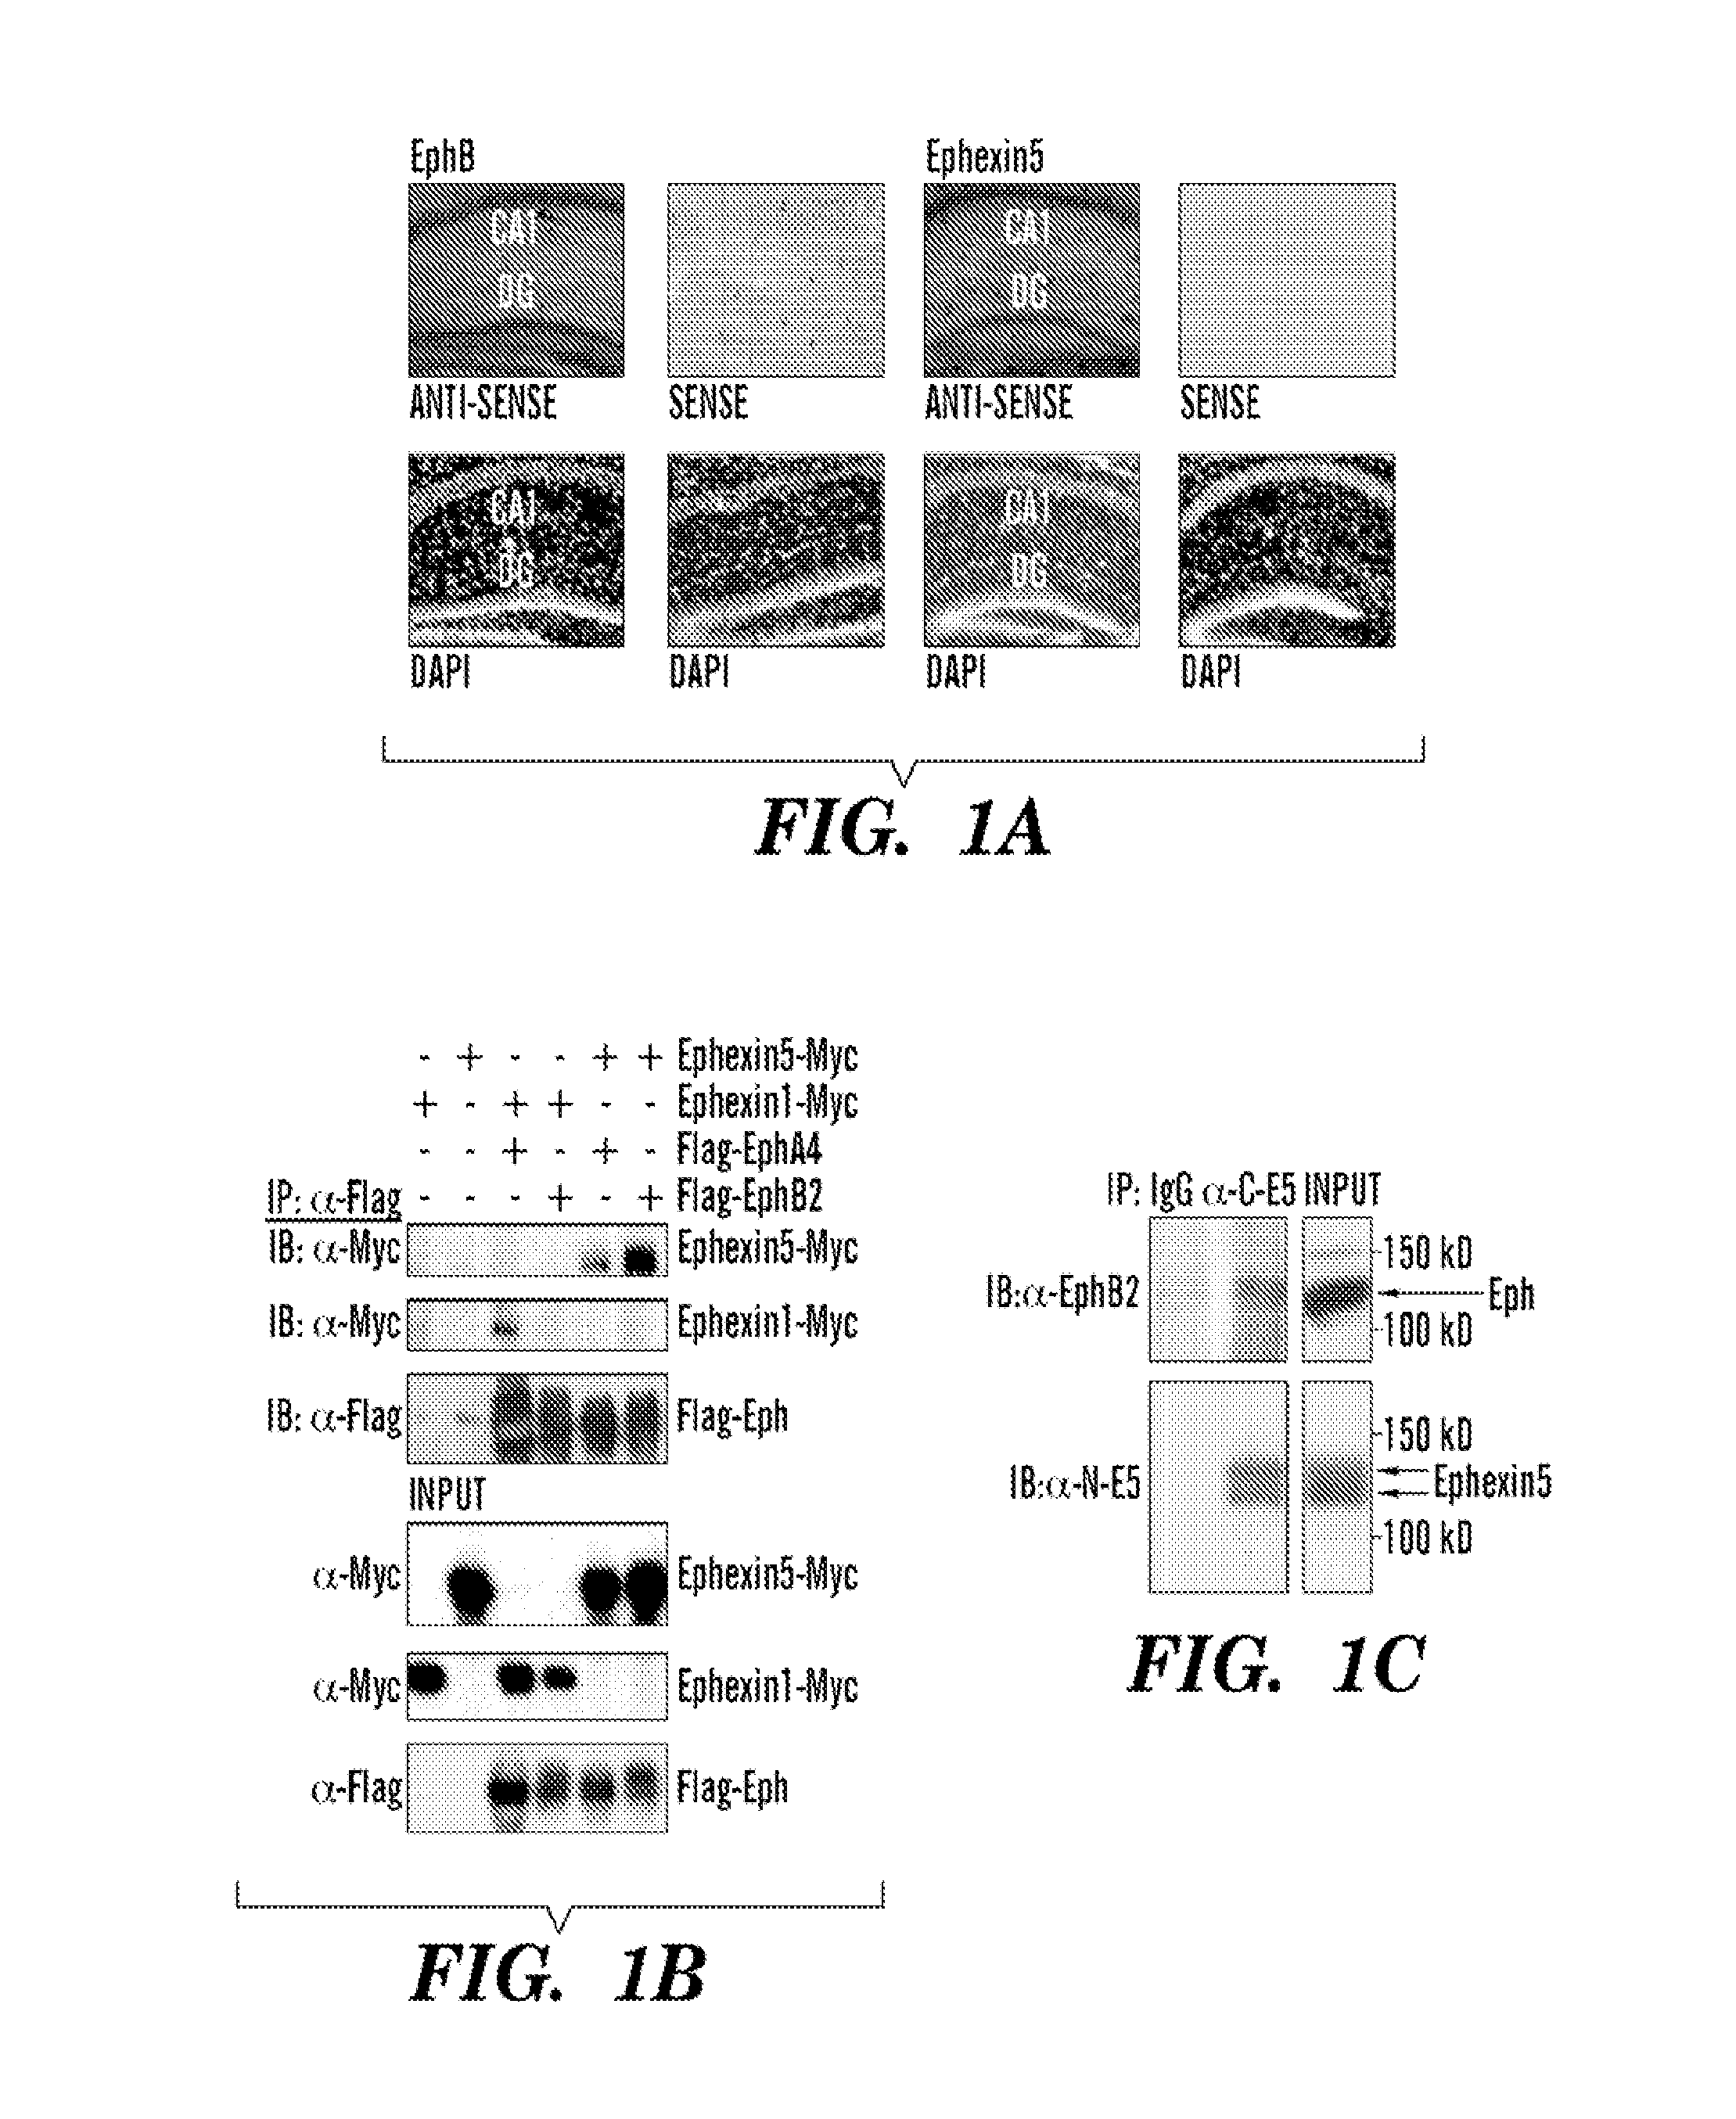 Method for determining activators of excitatory synapse formation